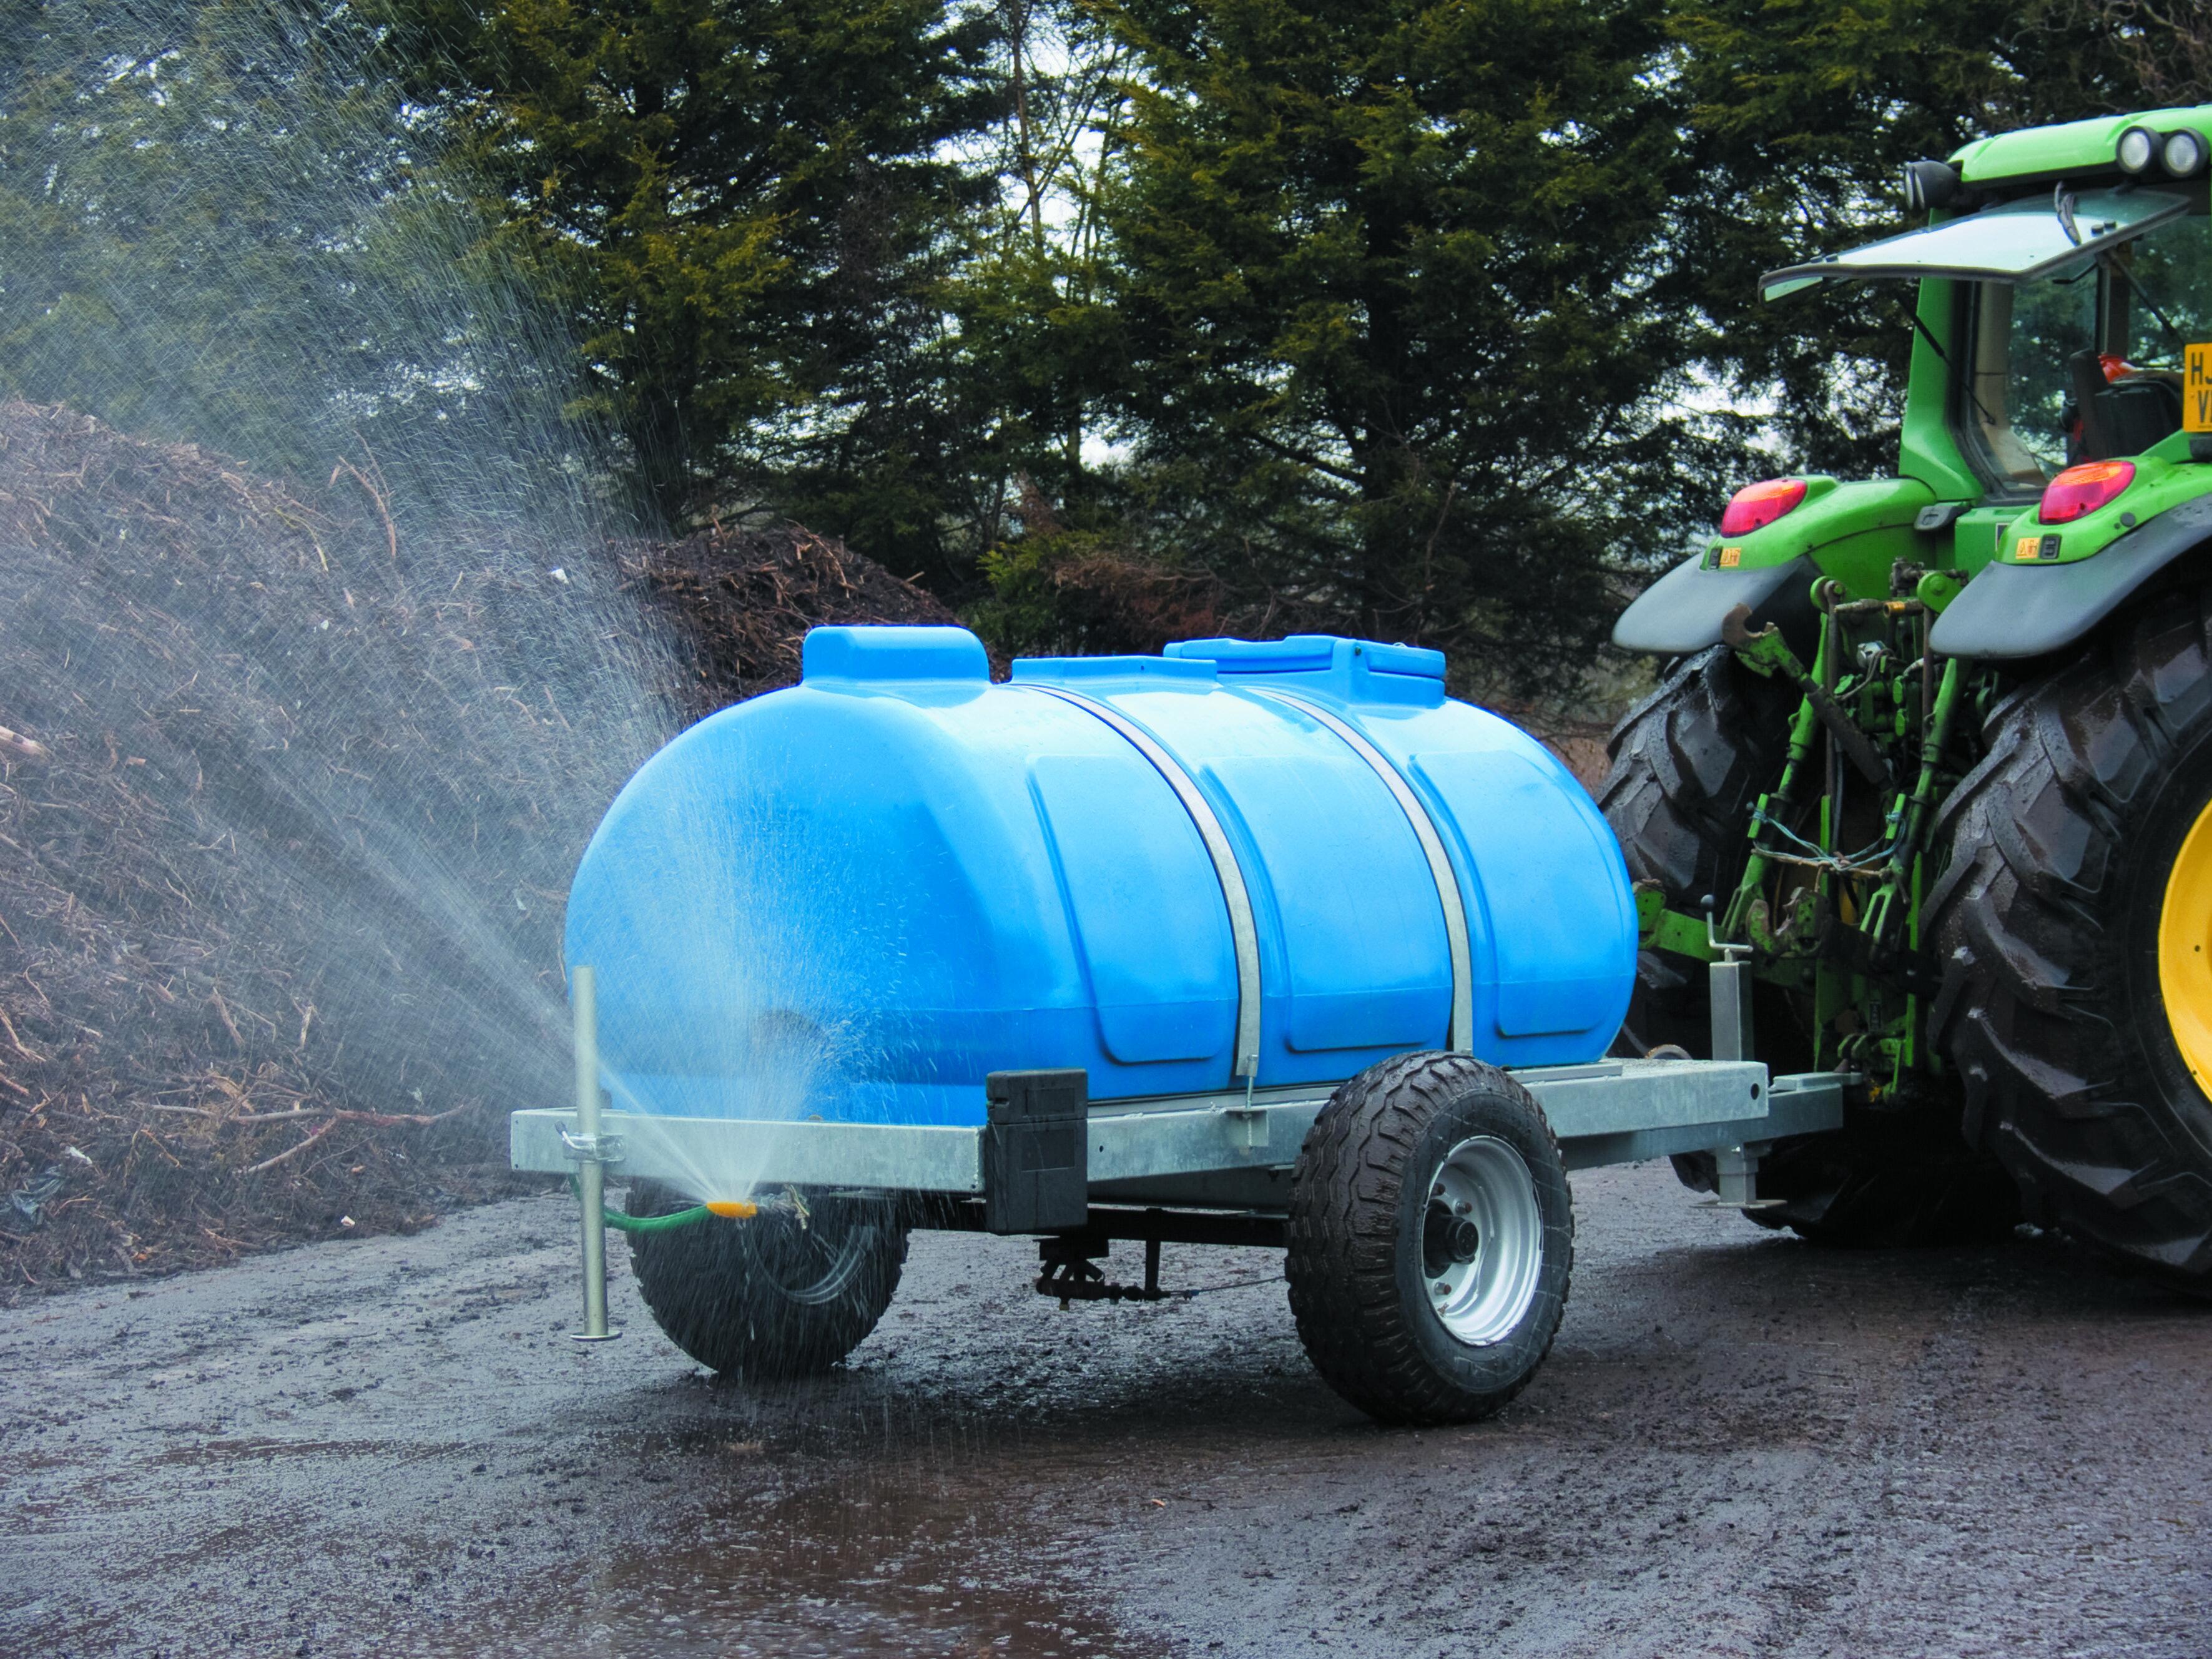 Dust suppression water Bowser in action